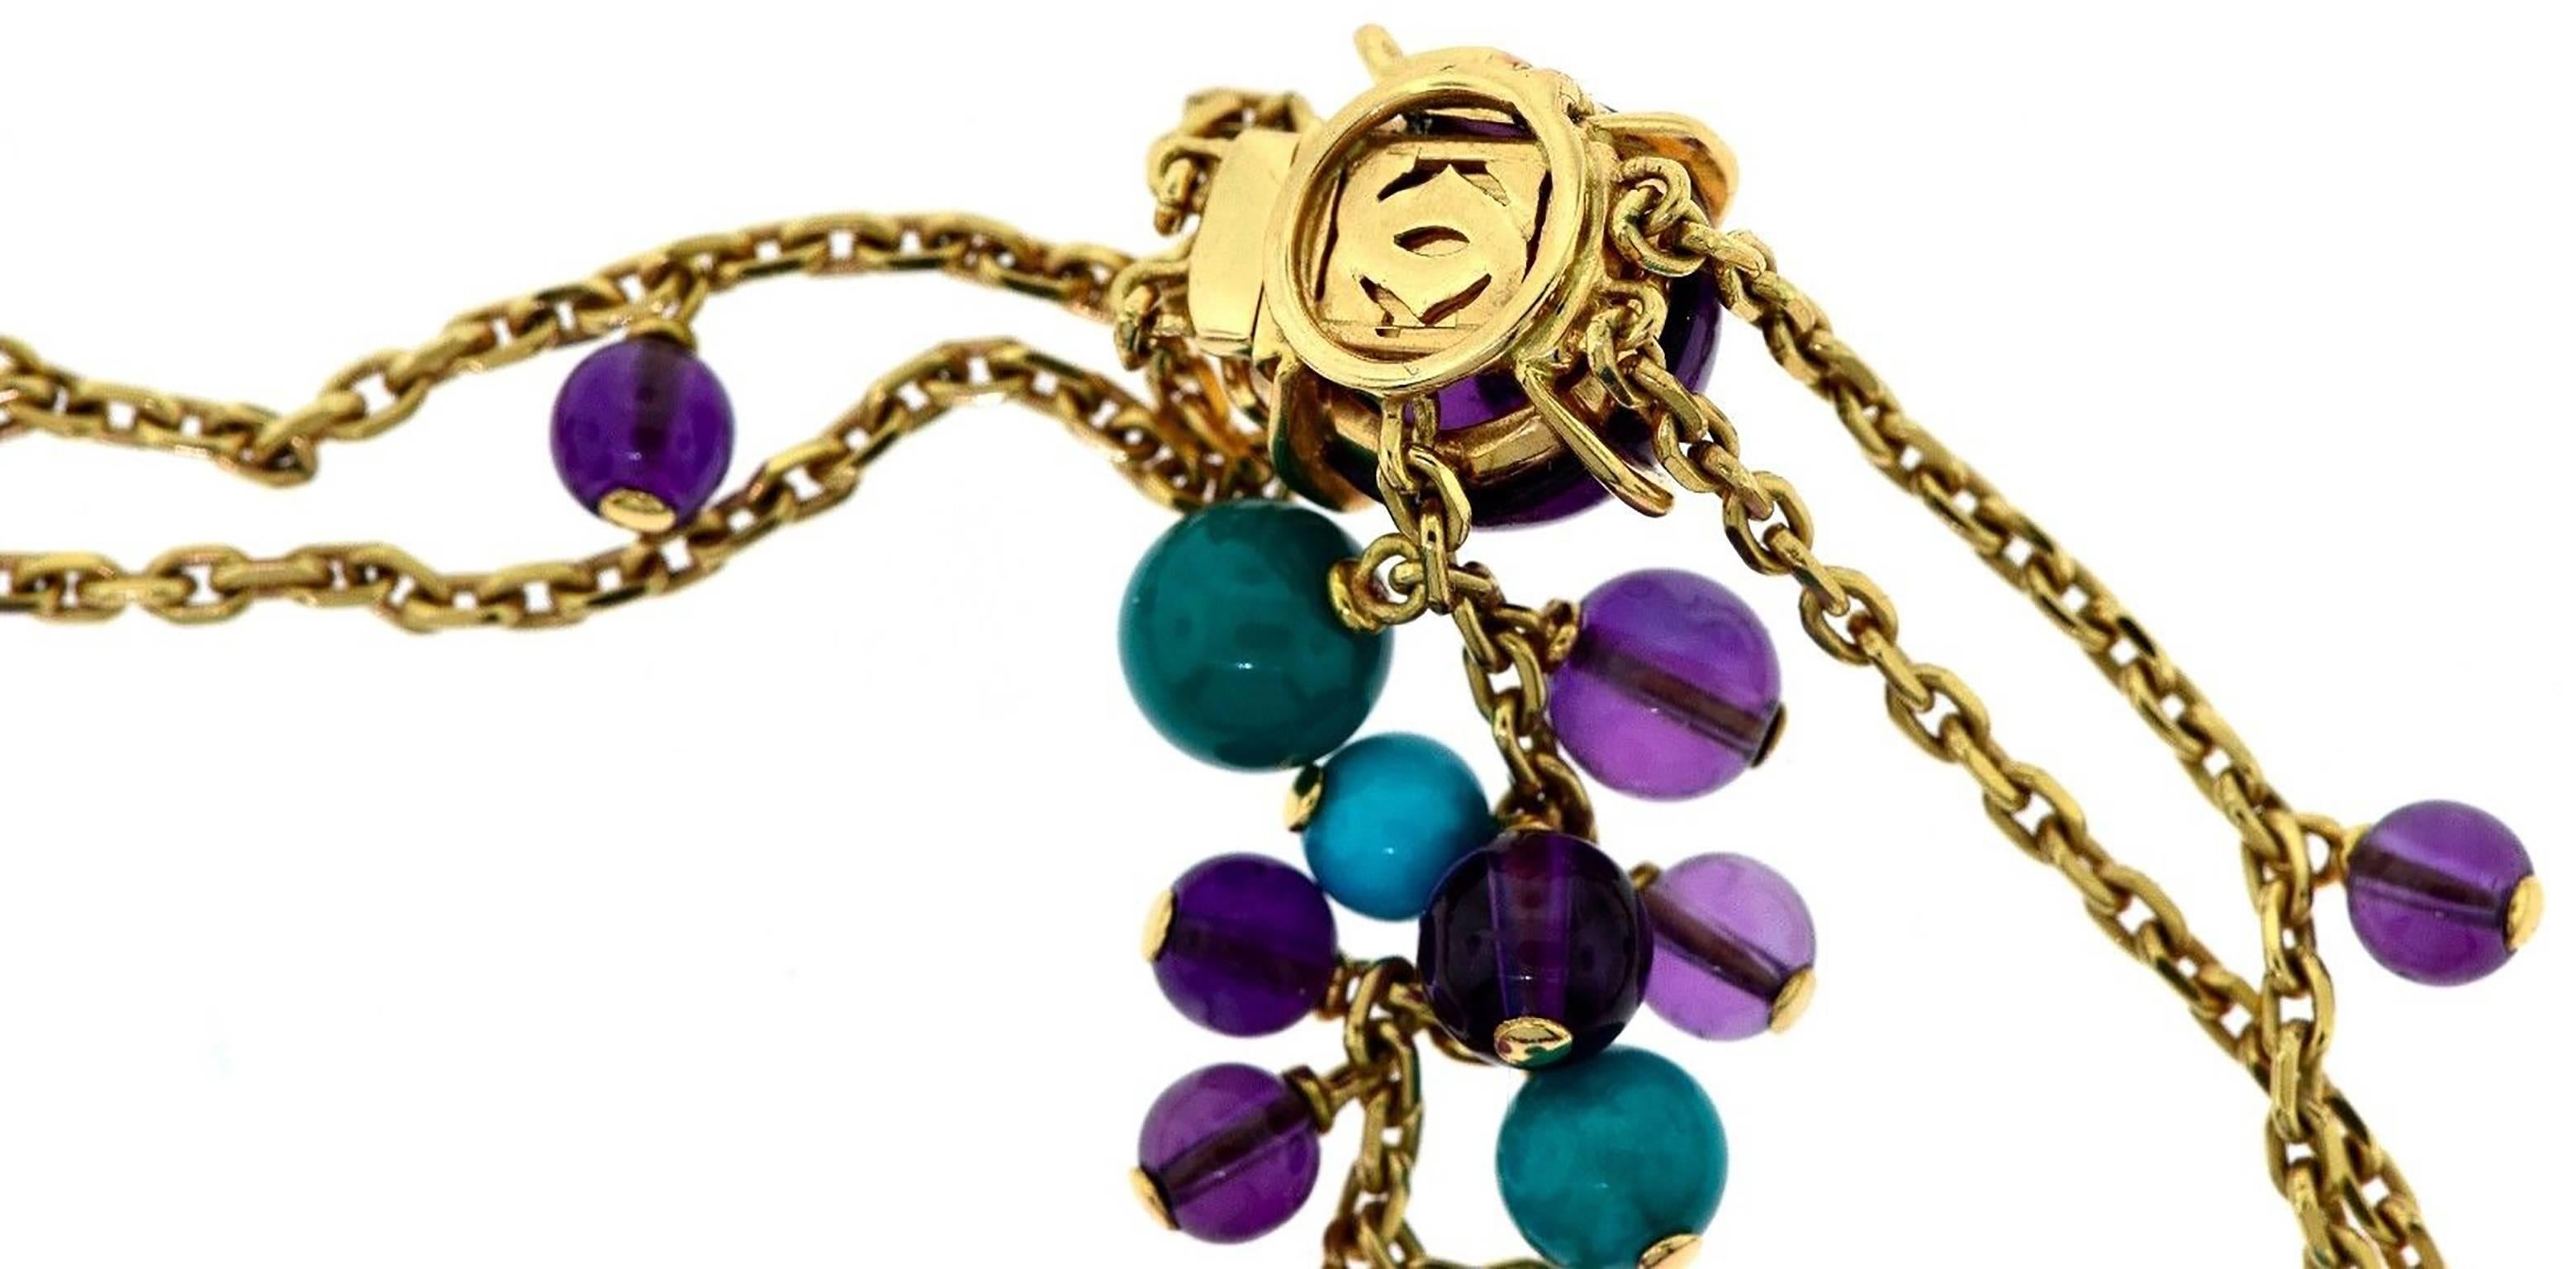 Cartier Delices de Goa Amethyst Turquoise Diamond Yellow Gold Bead Necklace In Excellent Condition For Sale In Miami, FL